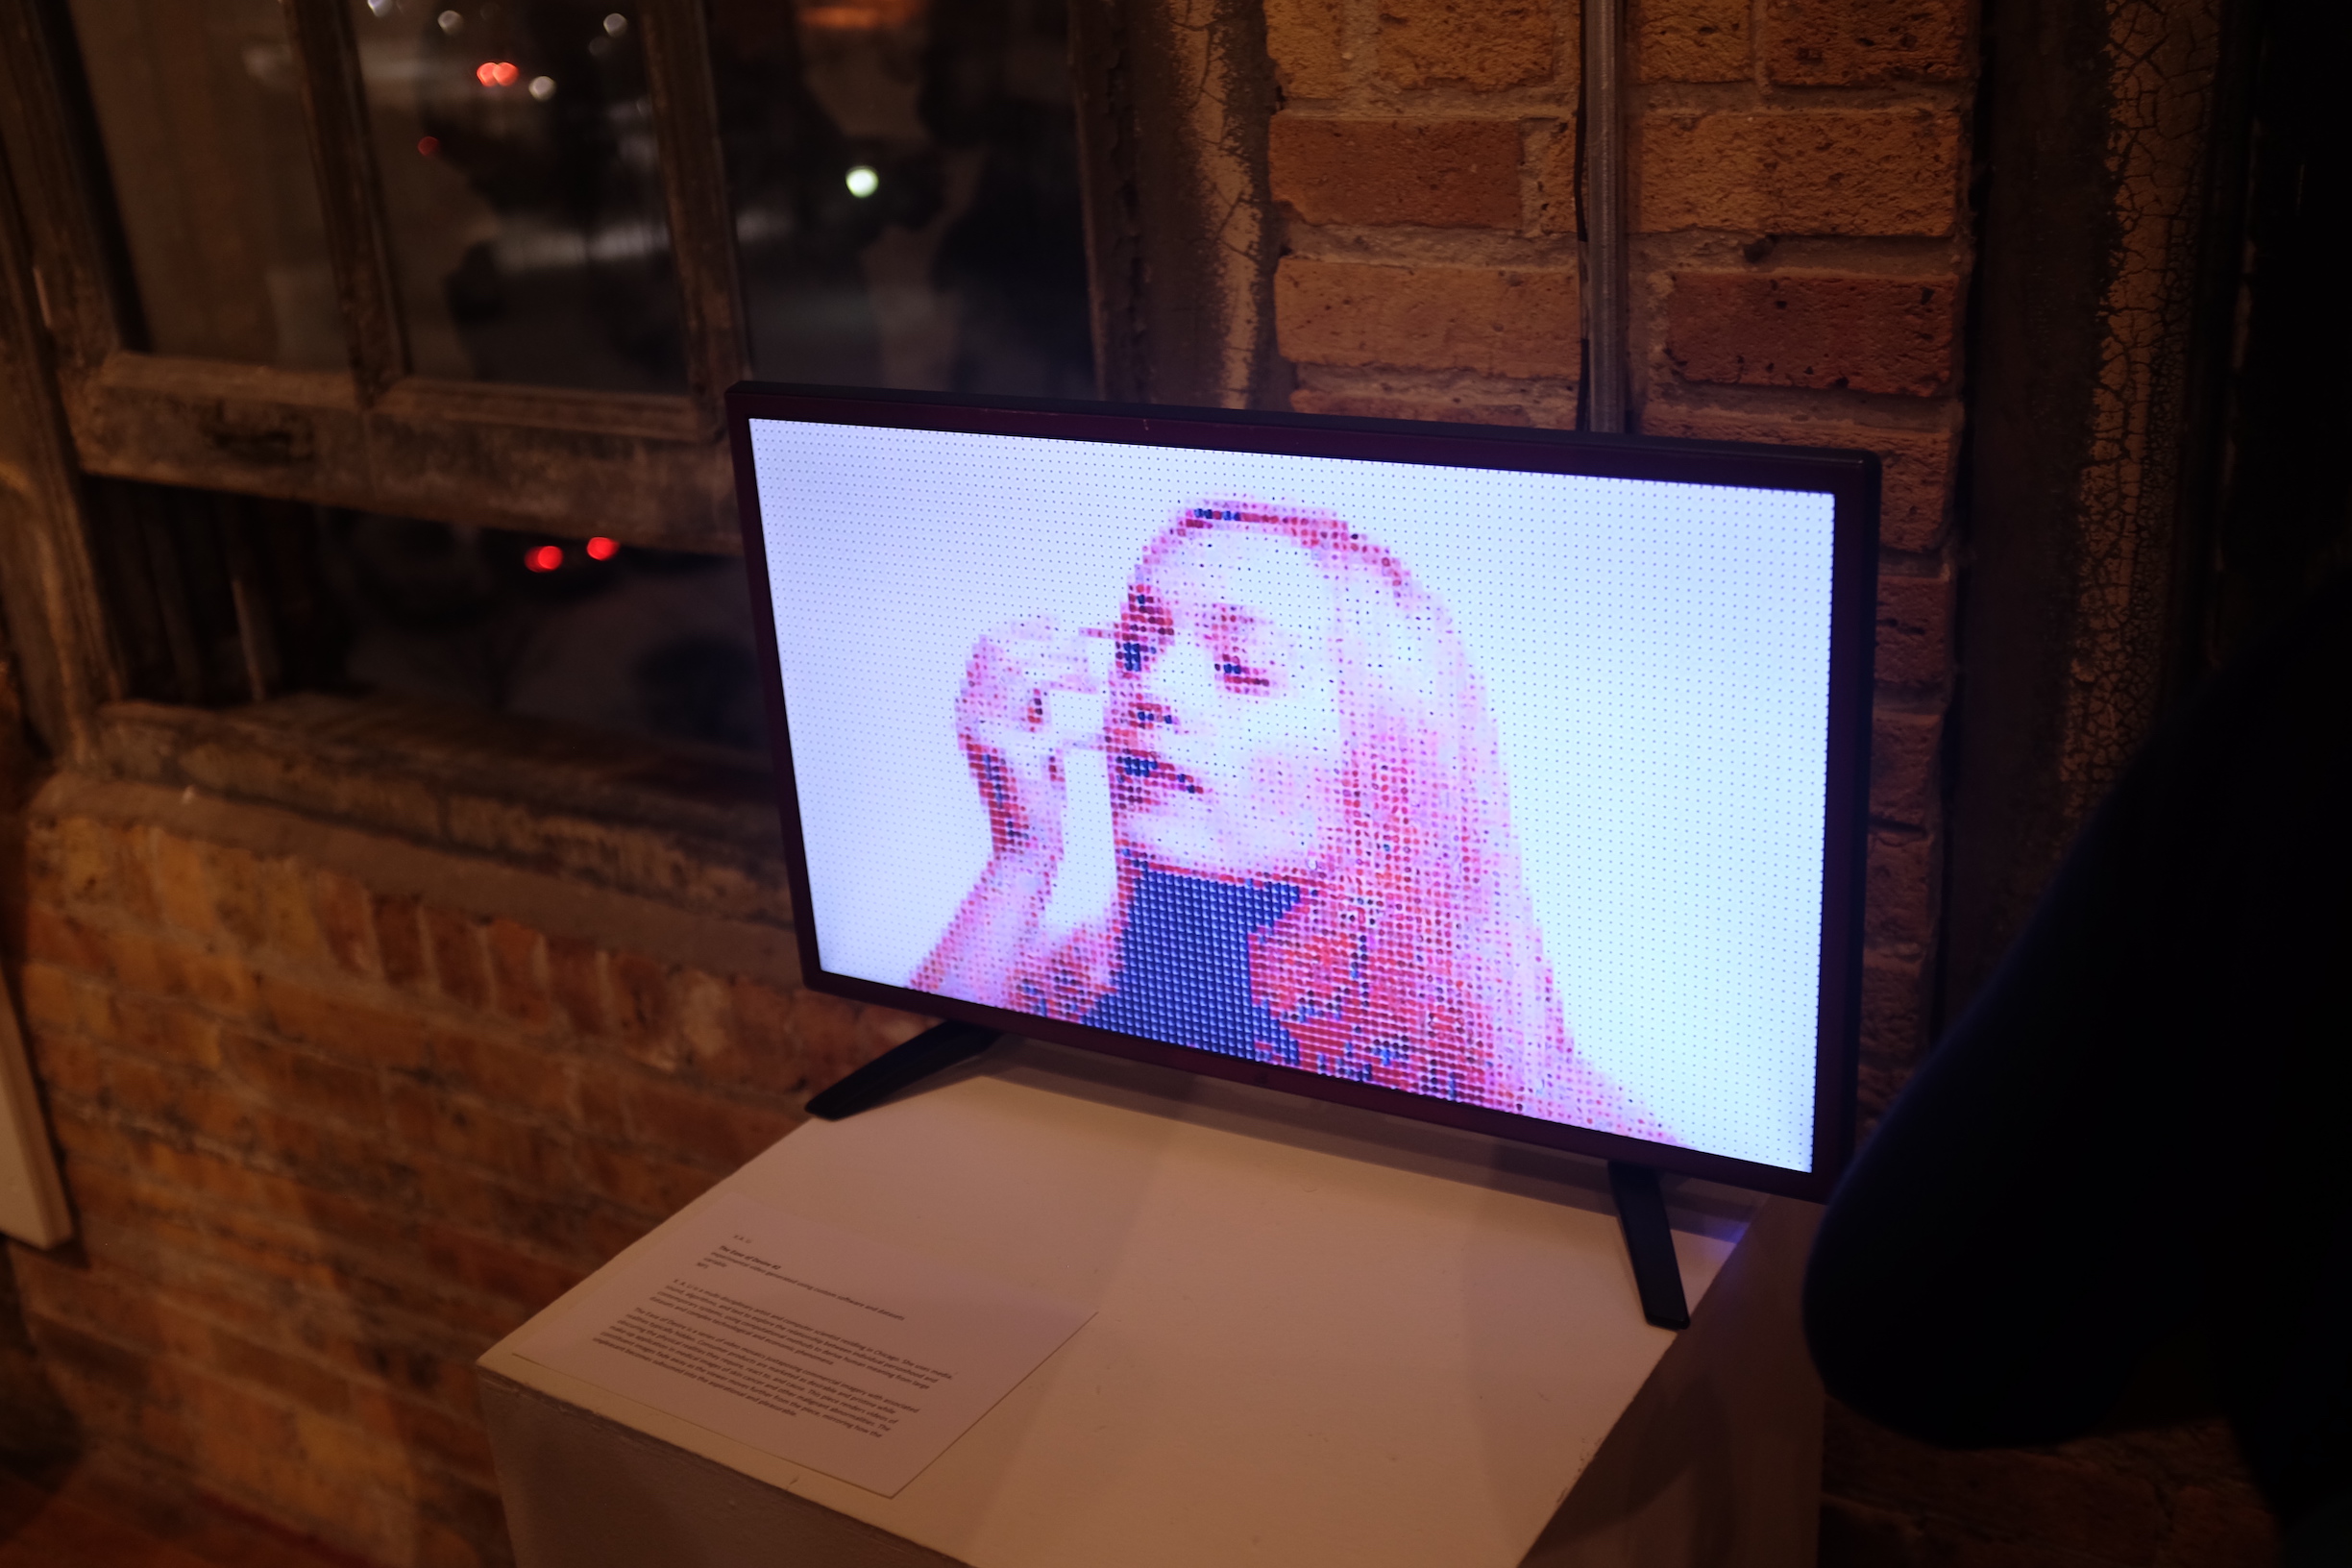 <i>The Ease of Desire no. 2</i> (2019). Installation view. <a href=https://womanmade.org/artwork/3rd-midwest-open/ target=_blank>Midwest Open</a>, Woman Made Gallery, Chicago, IL, US. 2019.